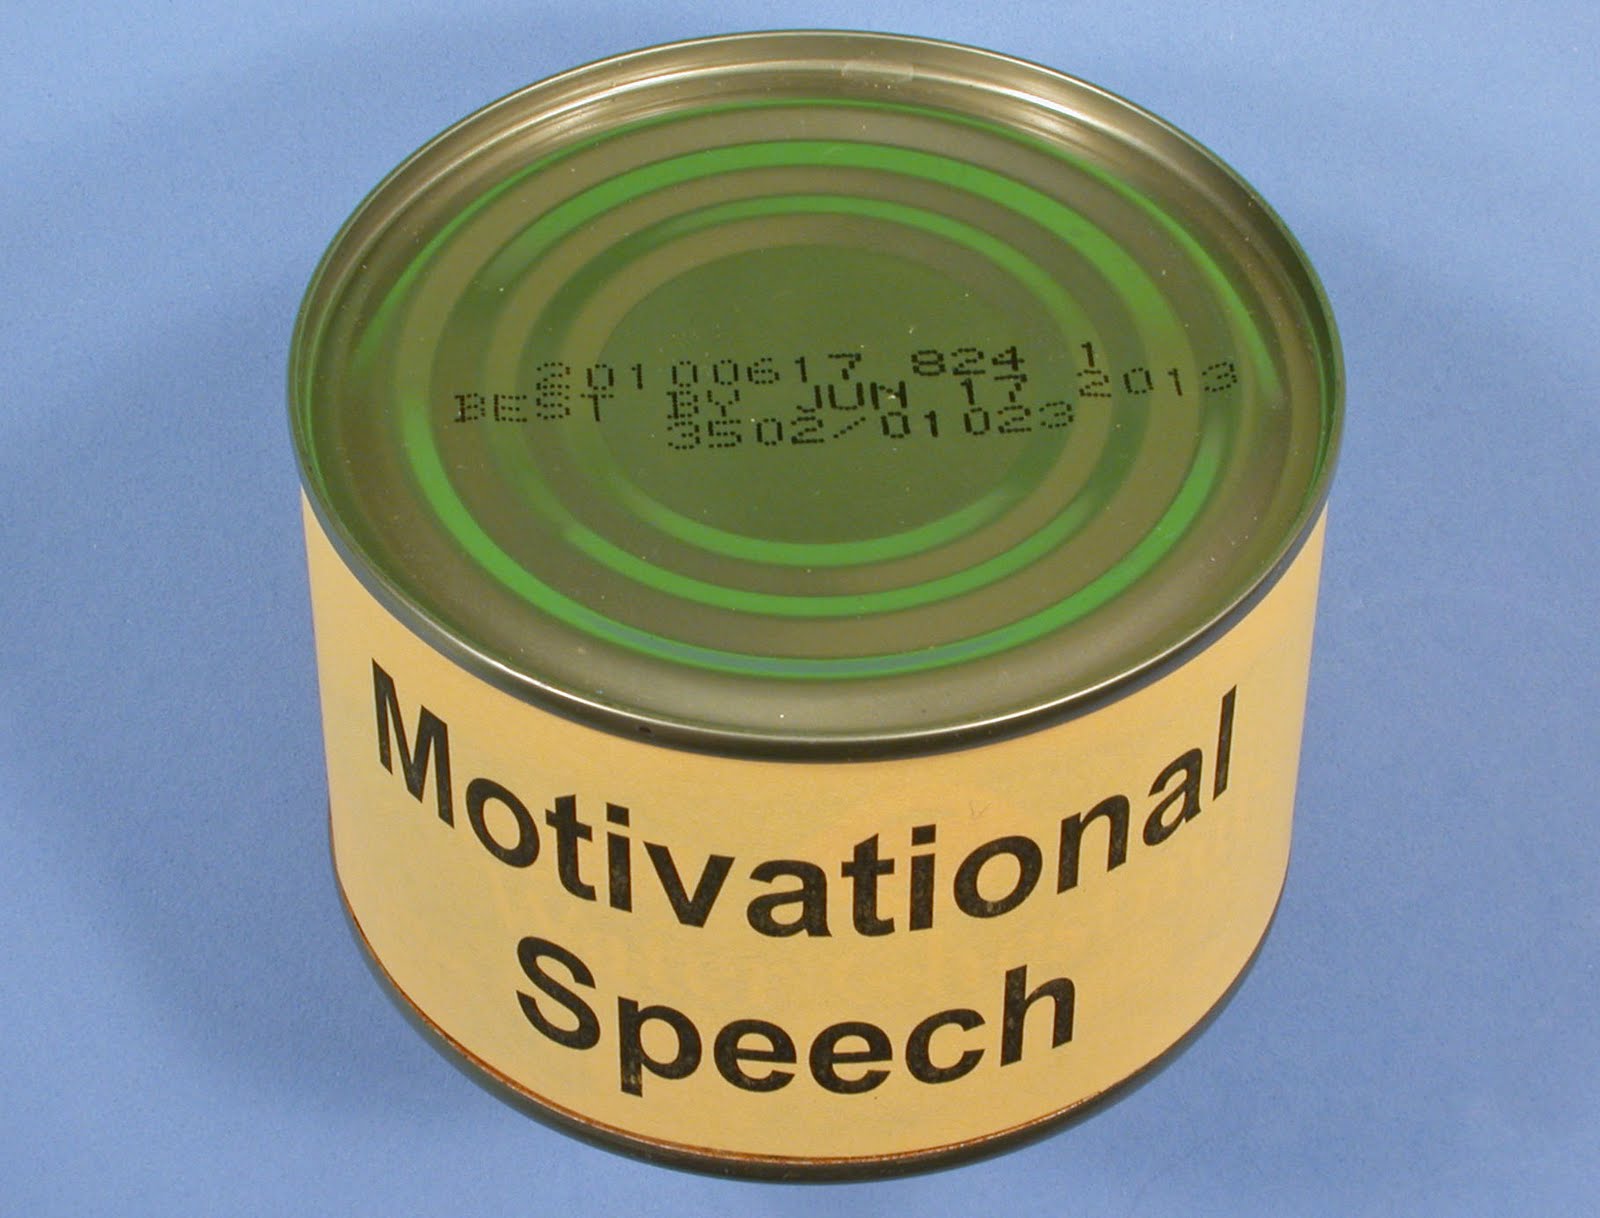 a canned speech meaning